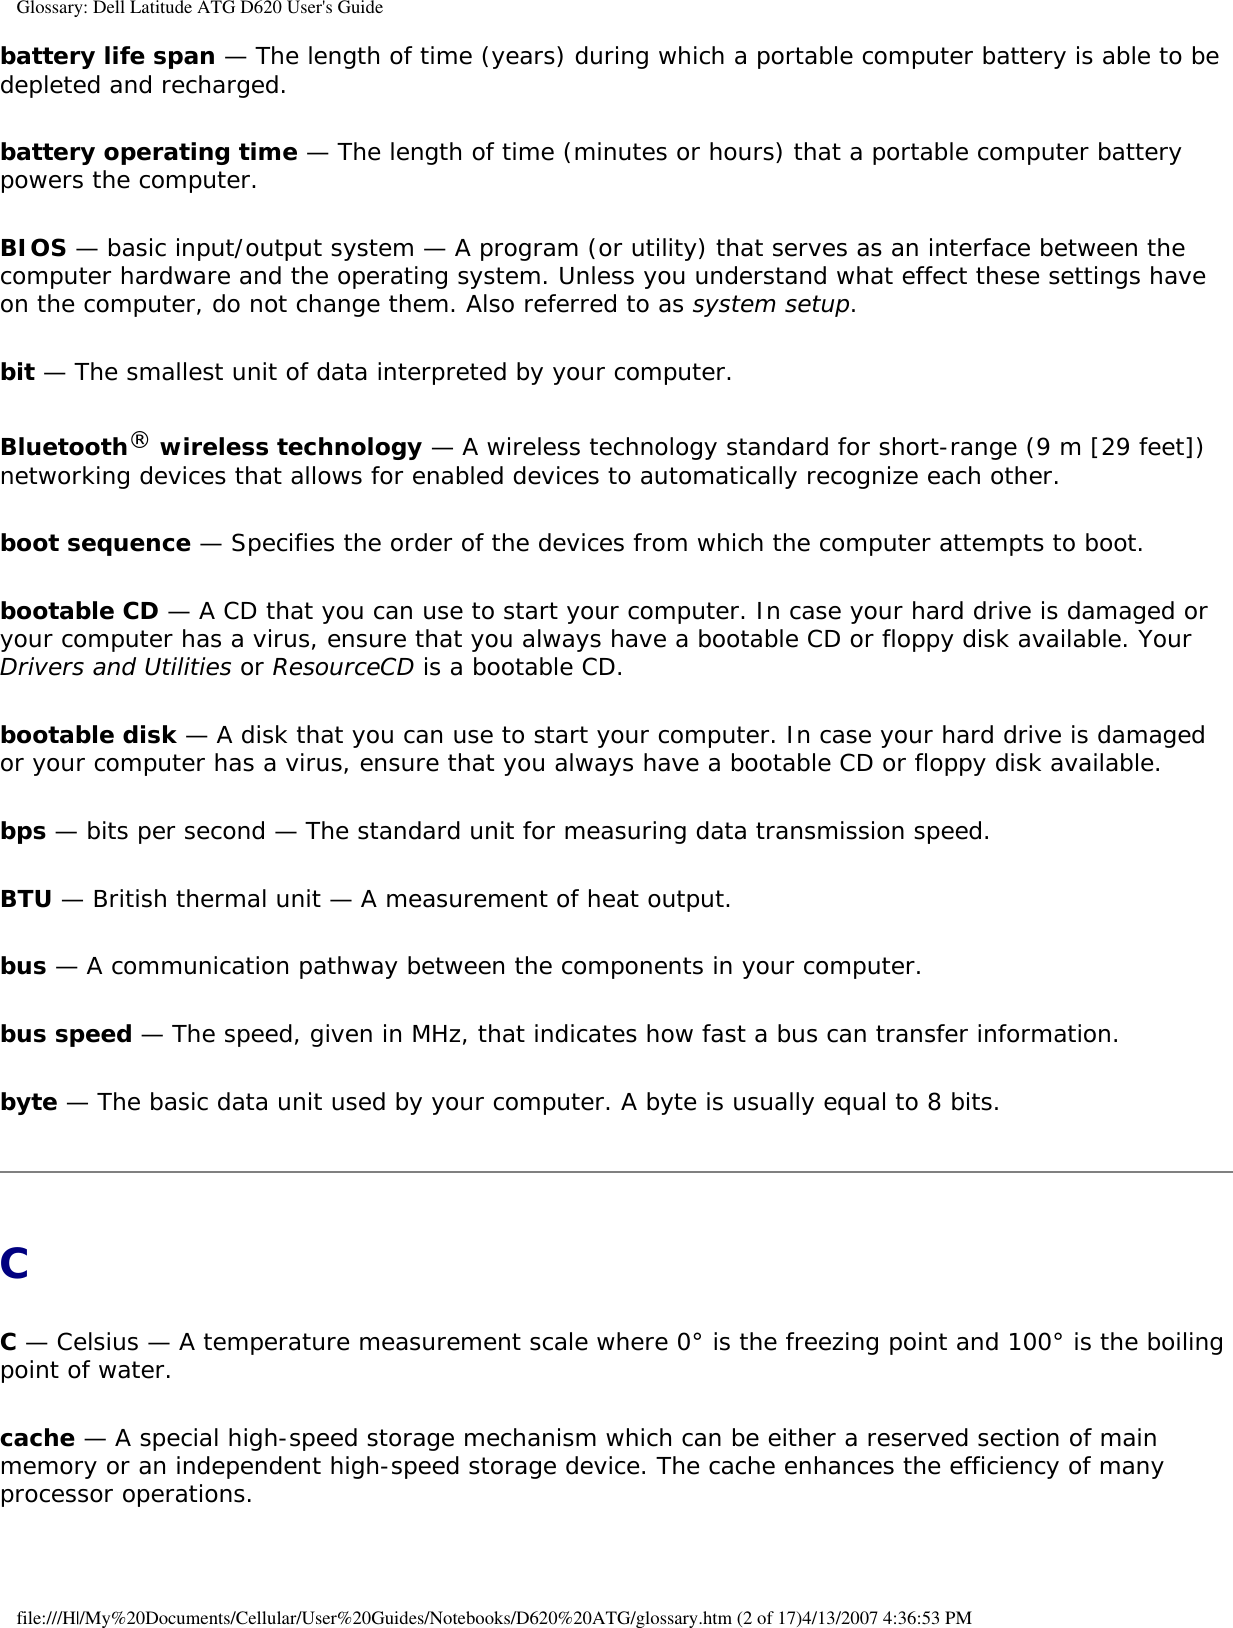 Glossary: Dell Latitude ATG D620 User&apos;s Guidebattery life span — The length of time (years) during which a portable computer battery is able to be depleted and recharged.battery operating time — The length of time (minutes or hours) that a portable computer battery powers the computer.BIOS — basic input/output system — A program (or utility) that serves as an interface between the computer hardware and the operating system. Unless you understand what effect these settings have on the computer, do not change them. Also referred to as system setup.bit — The smallest unit of data interpreted by your computer.Bluetooth® wireless technology — A wireless technology standard for short-range (9 m [29 feet]) networking devices that allows for enabled devices to automatically recognize each other.boot sequence — Specifies the order of the devices from which the computer attempts to boot.bootable CD — A CD that you can use to start your computer. In case your hard drive is damaged or your computer has a virus, ensure that you always have a bootable CD or floppy disk available. Your Drivers and Utilities or ResourceCD is a bootable CD.bootable disk — A disk that you can use to start your computer. In case your hard drive is damaged or your computer has a virus, ensure that you always have a bootable CD or floppy disk available.bps — bits per second — The standard unit for measuring data transmission speed.BTU — British thermal unit — A measurement of heat output.bus — A communication pathway between the components in your computer.bus speed — The speed, given in MHz, that indicates how fast a bus can transfer information.byte — The basic data unit used by your computer. A byte is usually equal to 8 bits.CC — Celsius — A temperature measurement scale where 0° is the freezing point and 100° is the boiling point of water.cache — A special high-speed storage mechanism which can be either a reserved section of main memory or an independent high-speed storage device. The cache enhances the efficiency of many processor operations.file:///H|/My%20Documents/Cellular/User%20Guides/Notebooks/D620%20ATG/glossary.htm (2 of 17)4/13/2007 4:36:53 PM